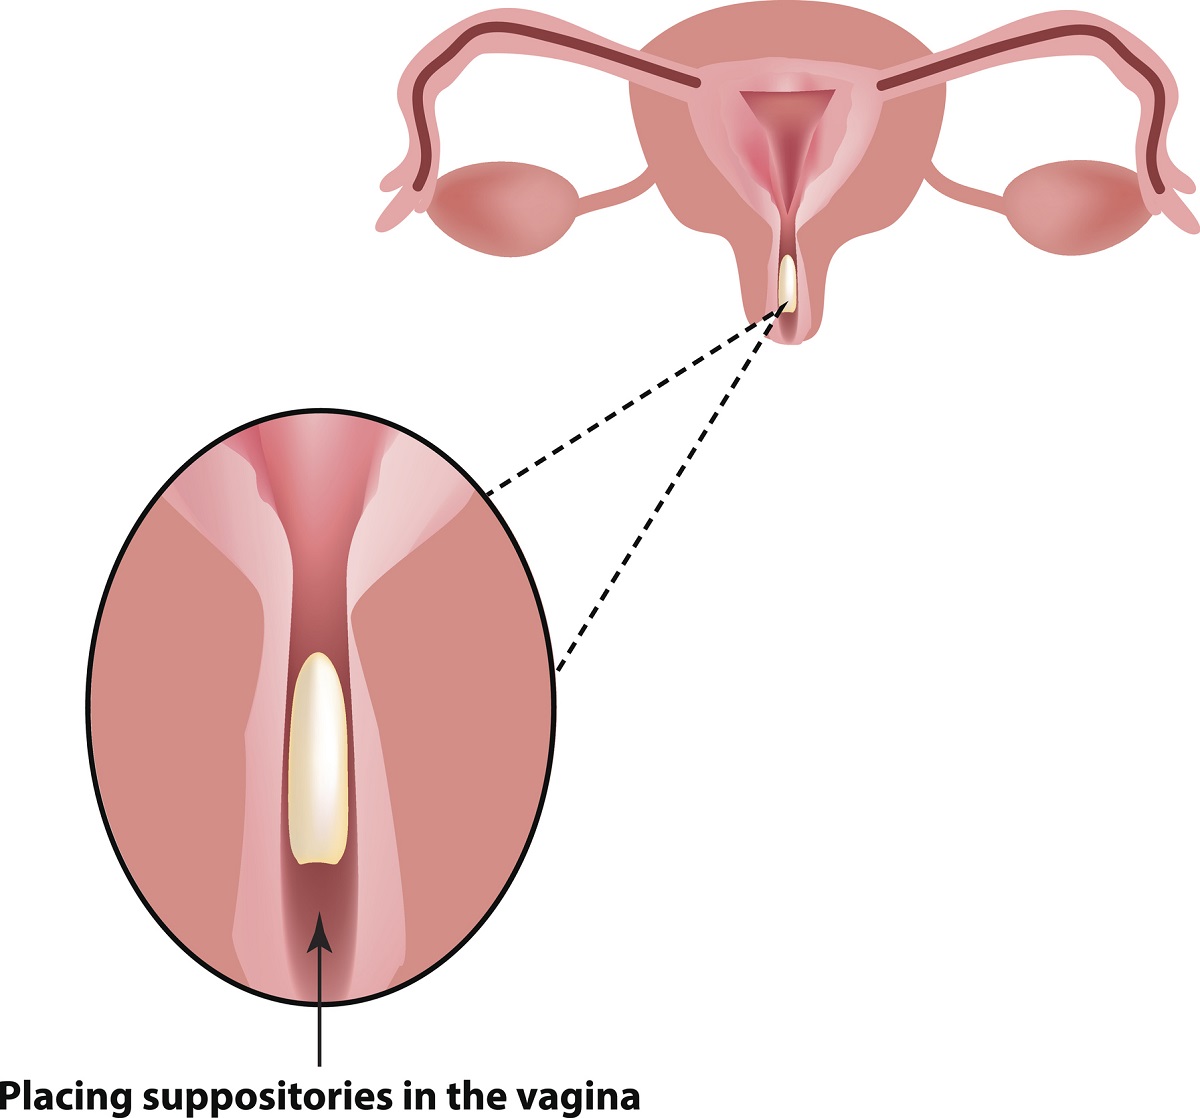 Application of the suppository into the vagina. Photo source: Getty Images.